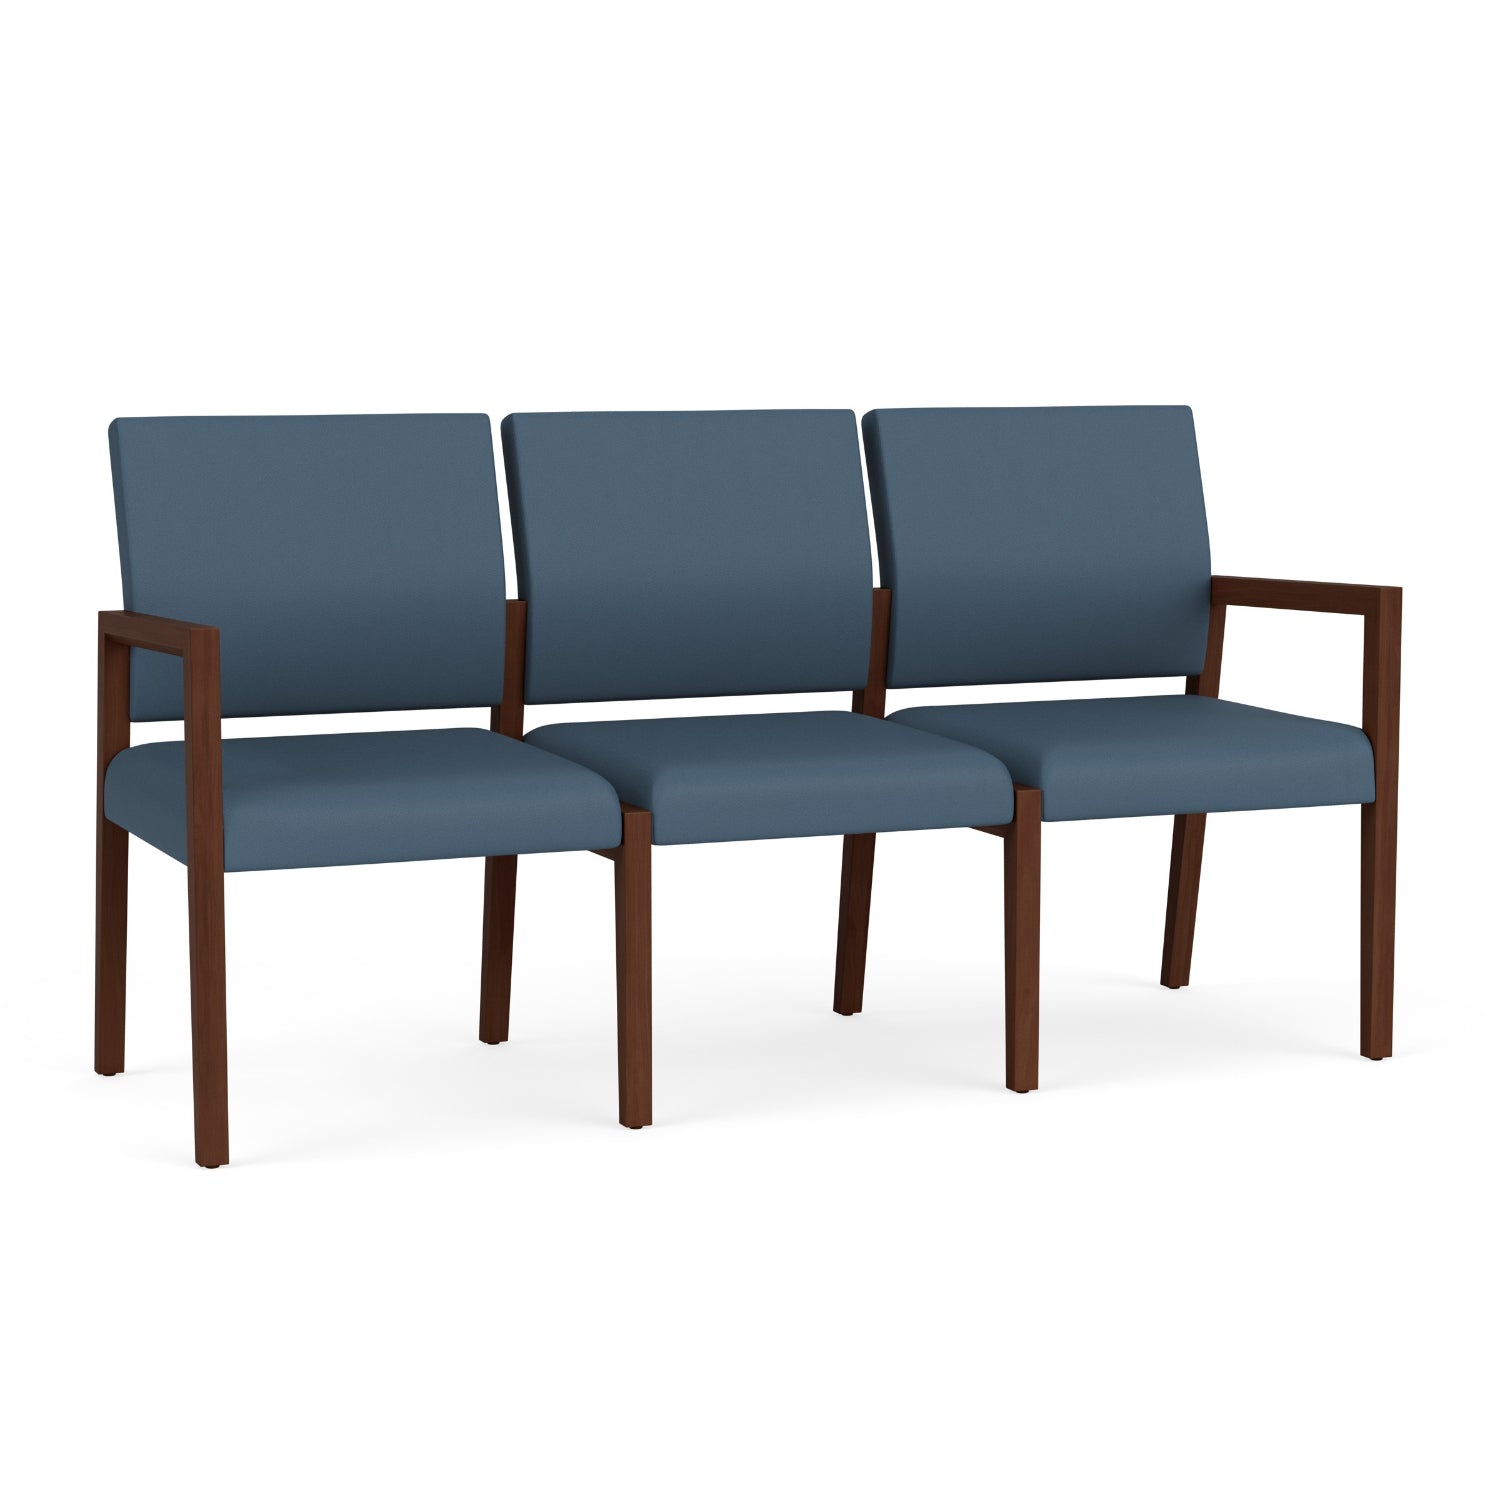 Brooklyn Collection Reception Seating, 3 Seat Sofa, Standard Vinyl Upholstery, FREE SHIPPING